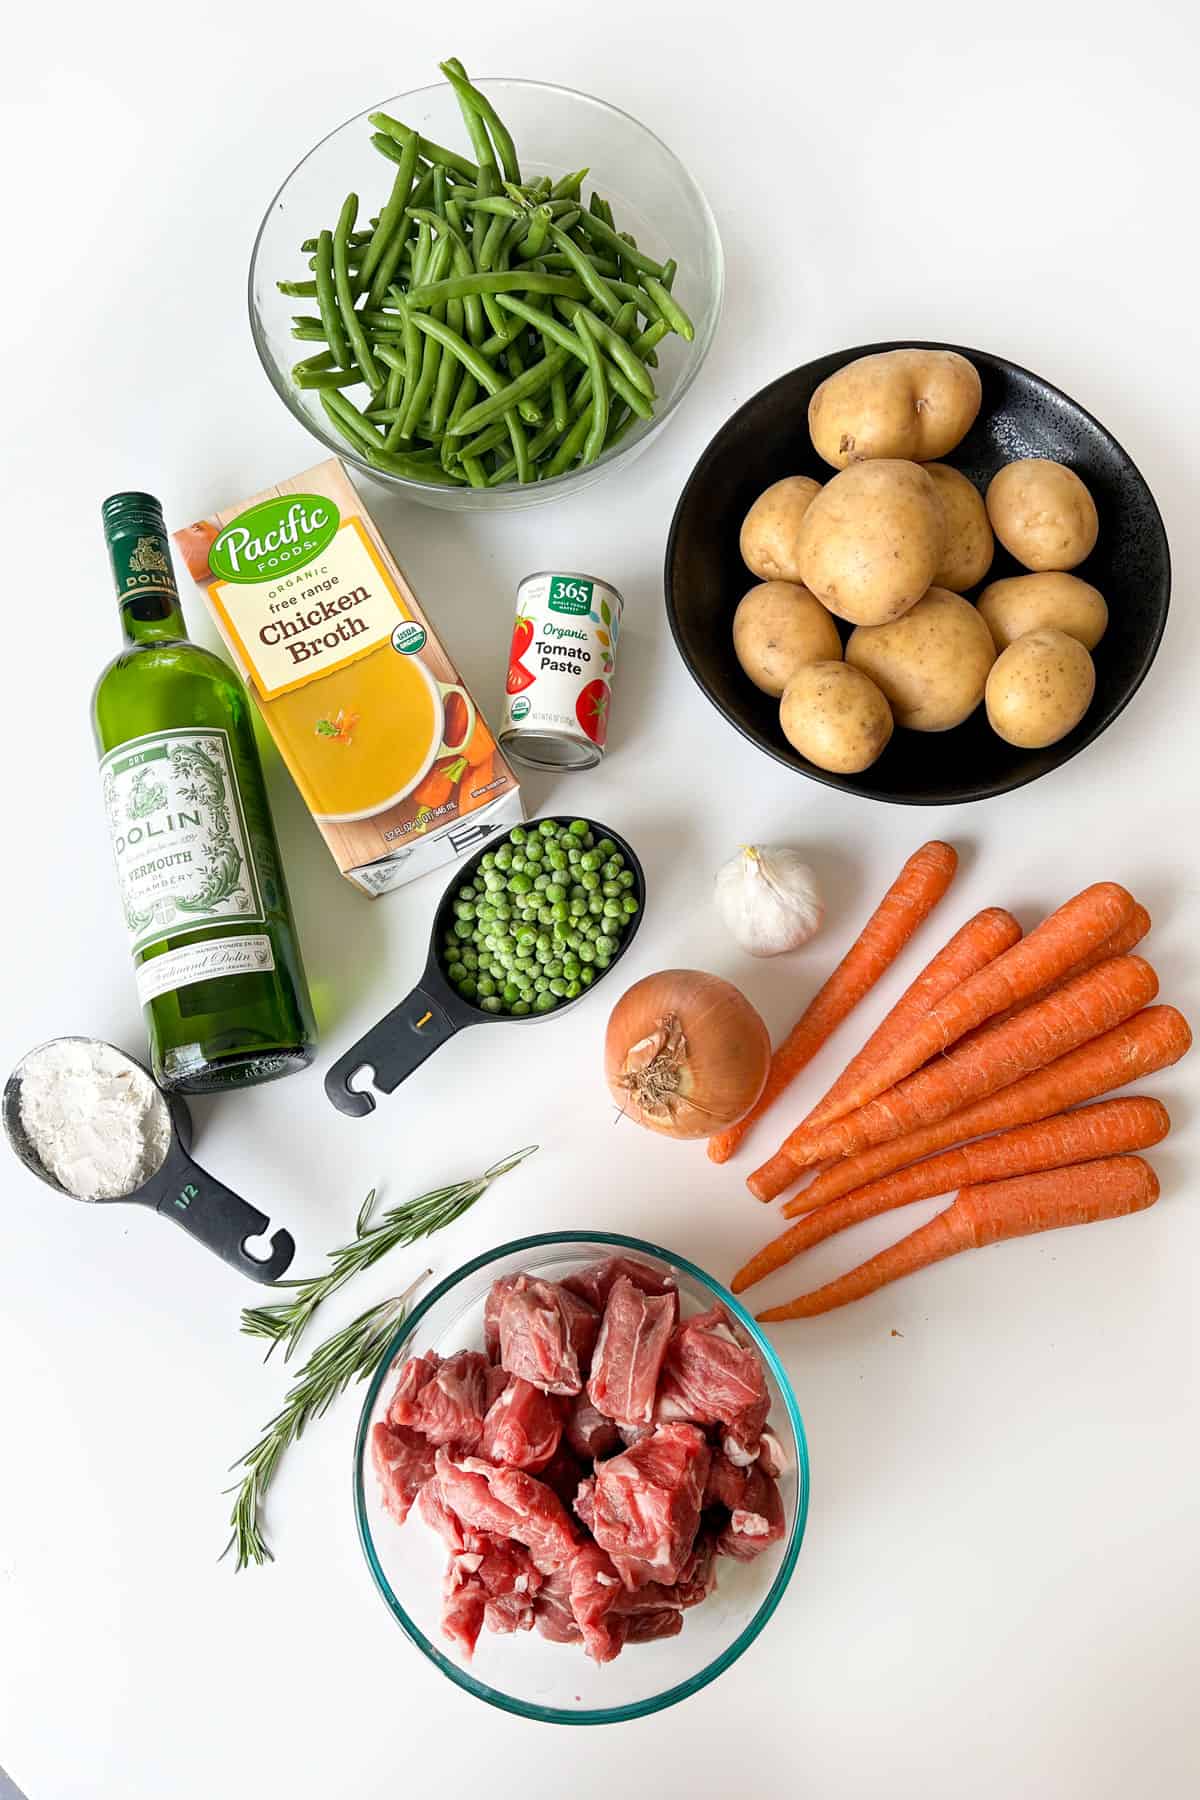 lamb stew ingredients on a white surface: bowl of green beans, bowl of yukon gold potatoes, bottle of dry vermouth, box of chicken broth, can of tomato paste, 8 carrots, a yellow onions, a bulb of garlic, a bowl of lamb stew meat, a cup of peas, a half cup of white flour, two sprigs of rosemary.